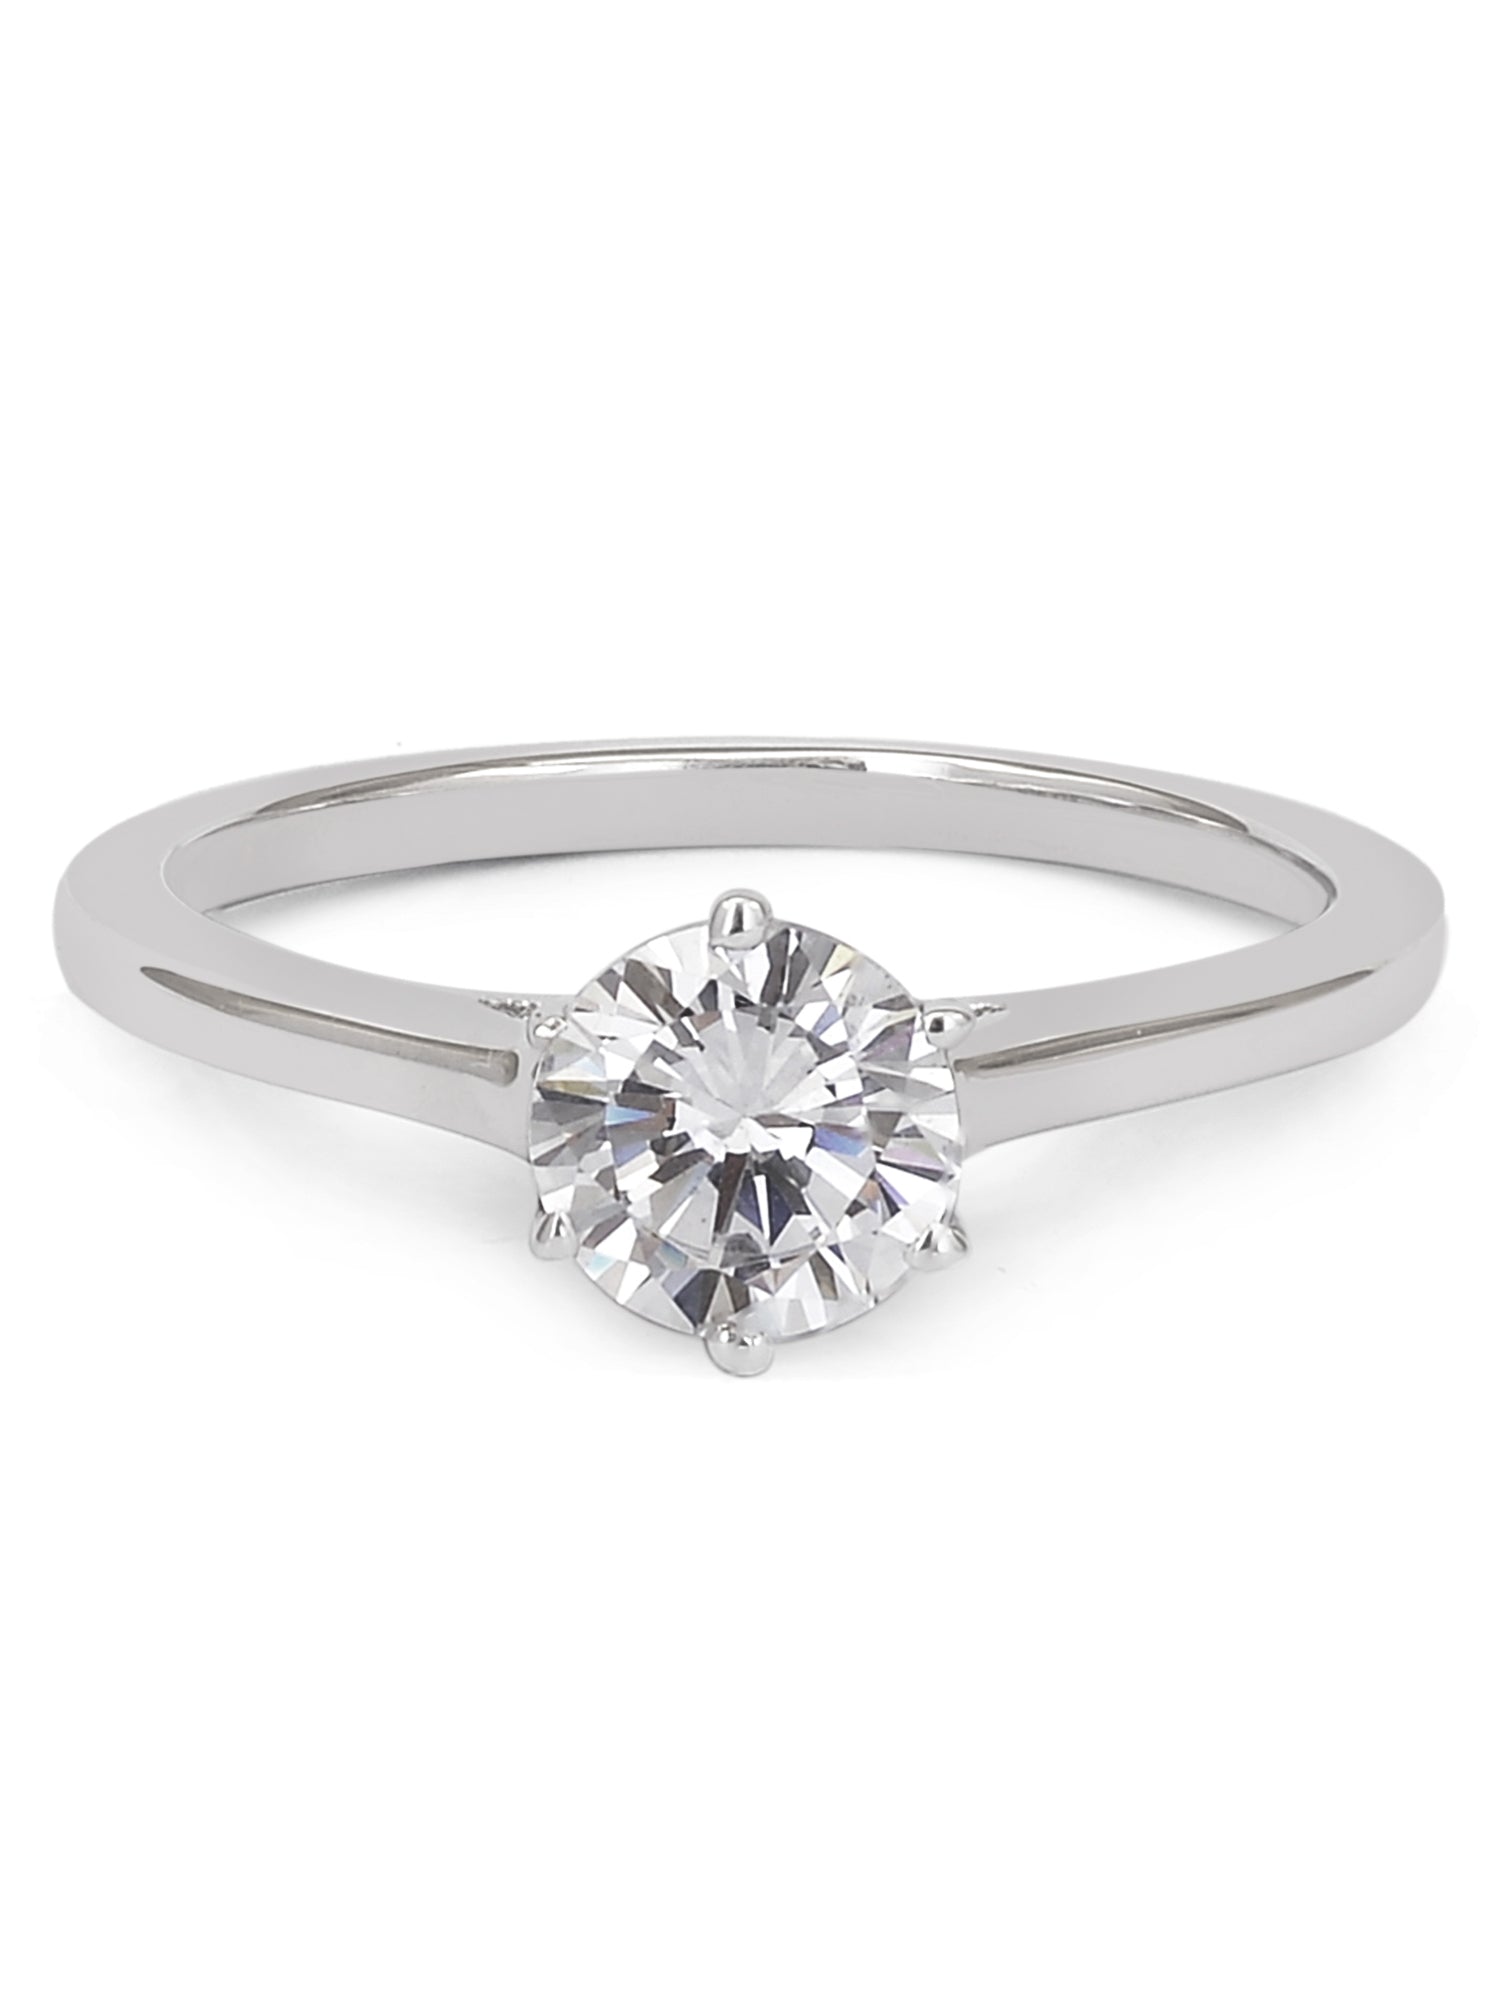 Pure 925 Sterling Silver Solitary Solitaire Ring